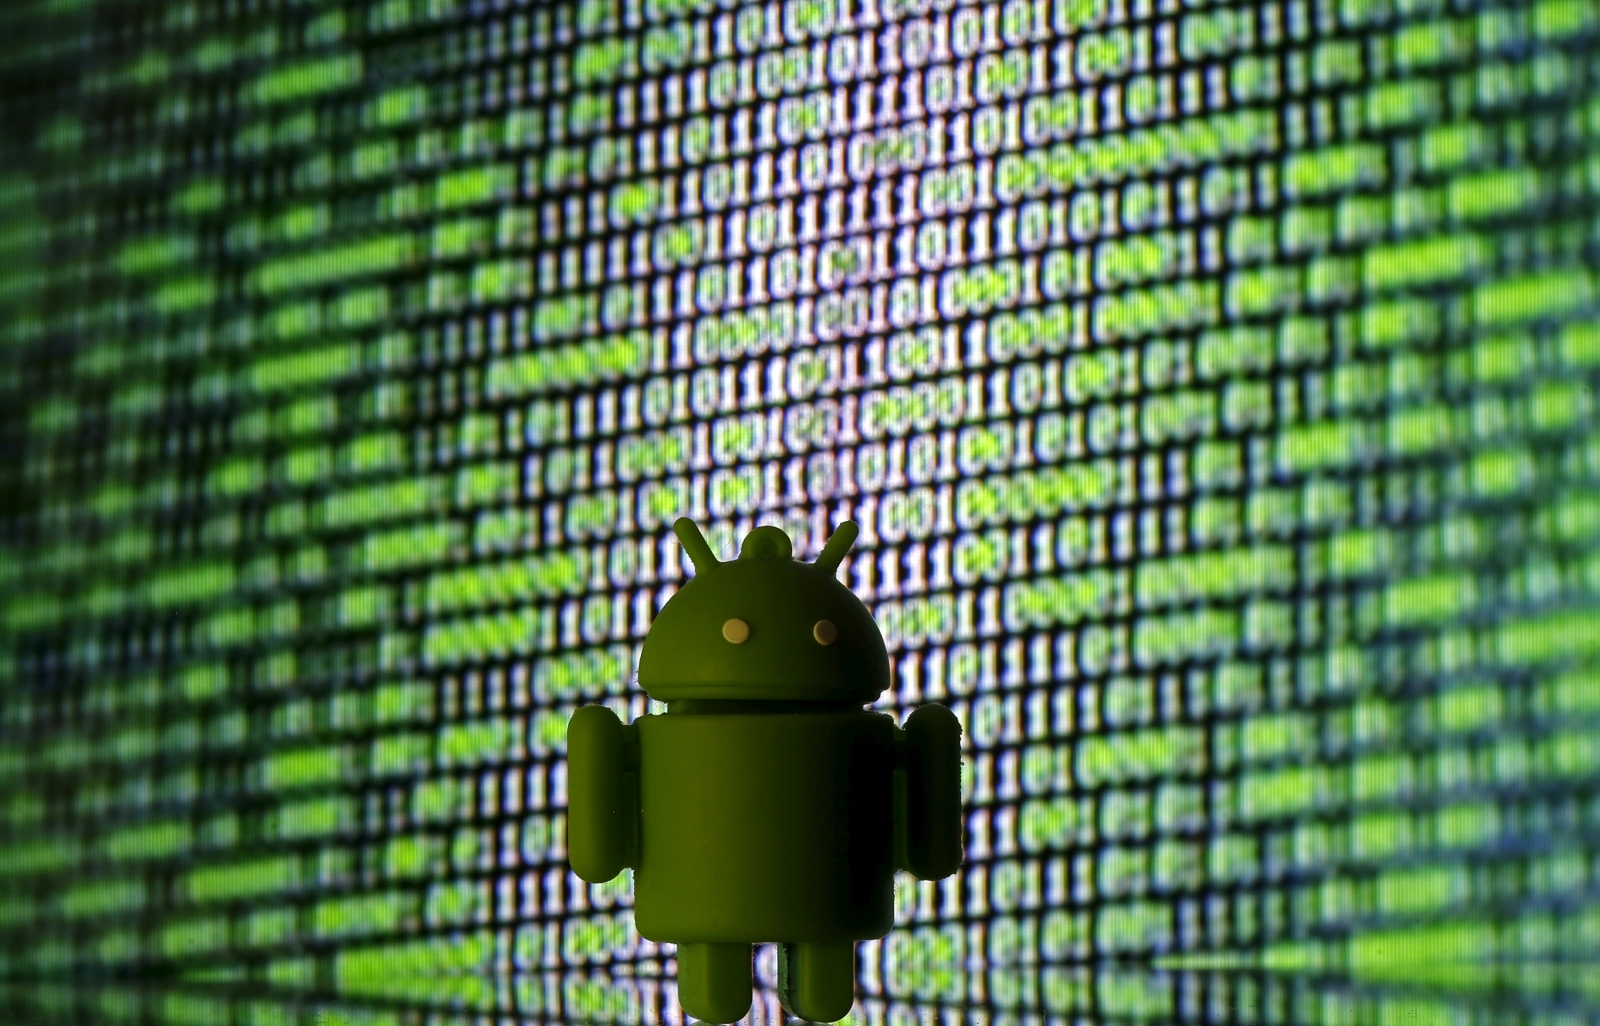 Android Trojan targeting over 90 major banks across US and Europe